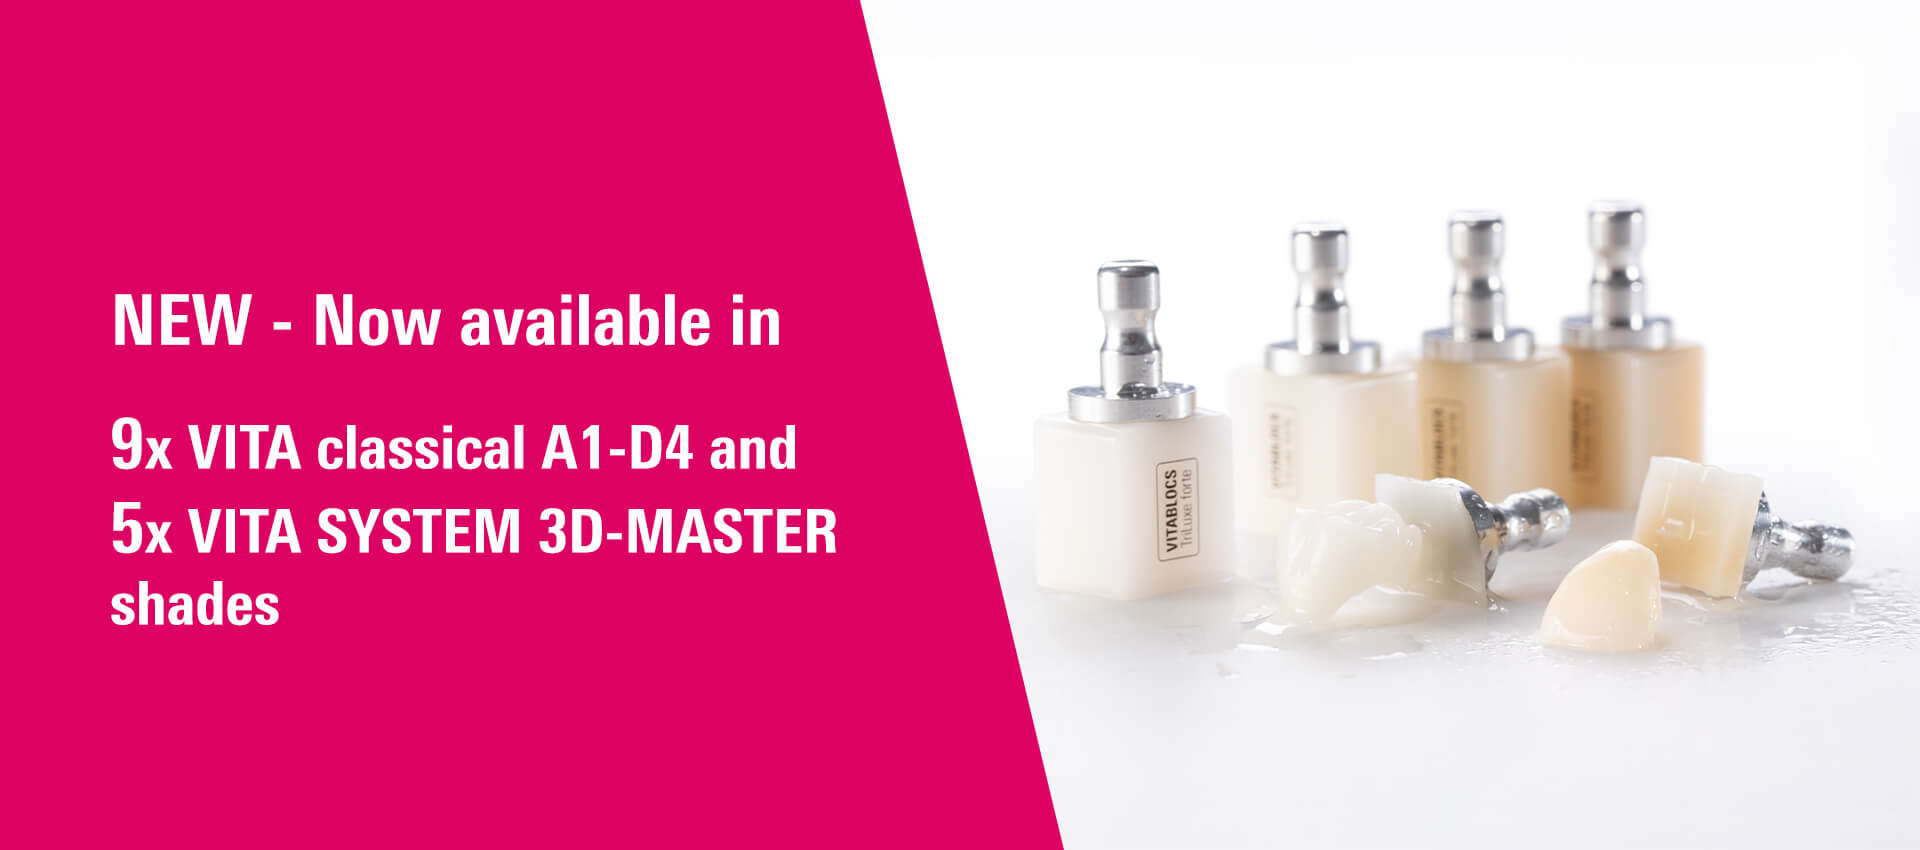 NEW - Now available in 9x VITA classical A1-D4 and 5x VITA SYSTEM 3D-MASTER shades